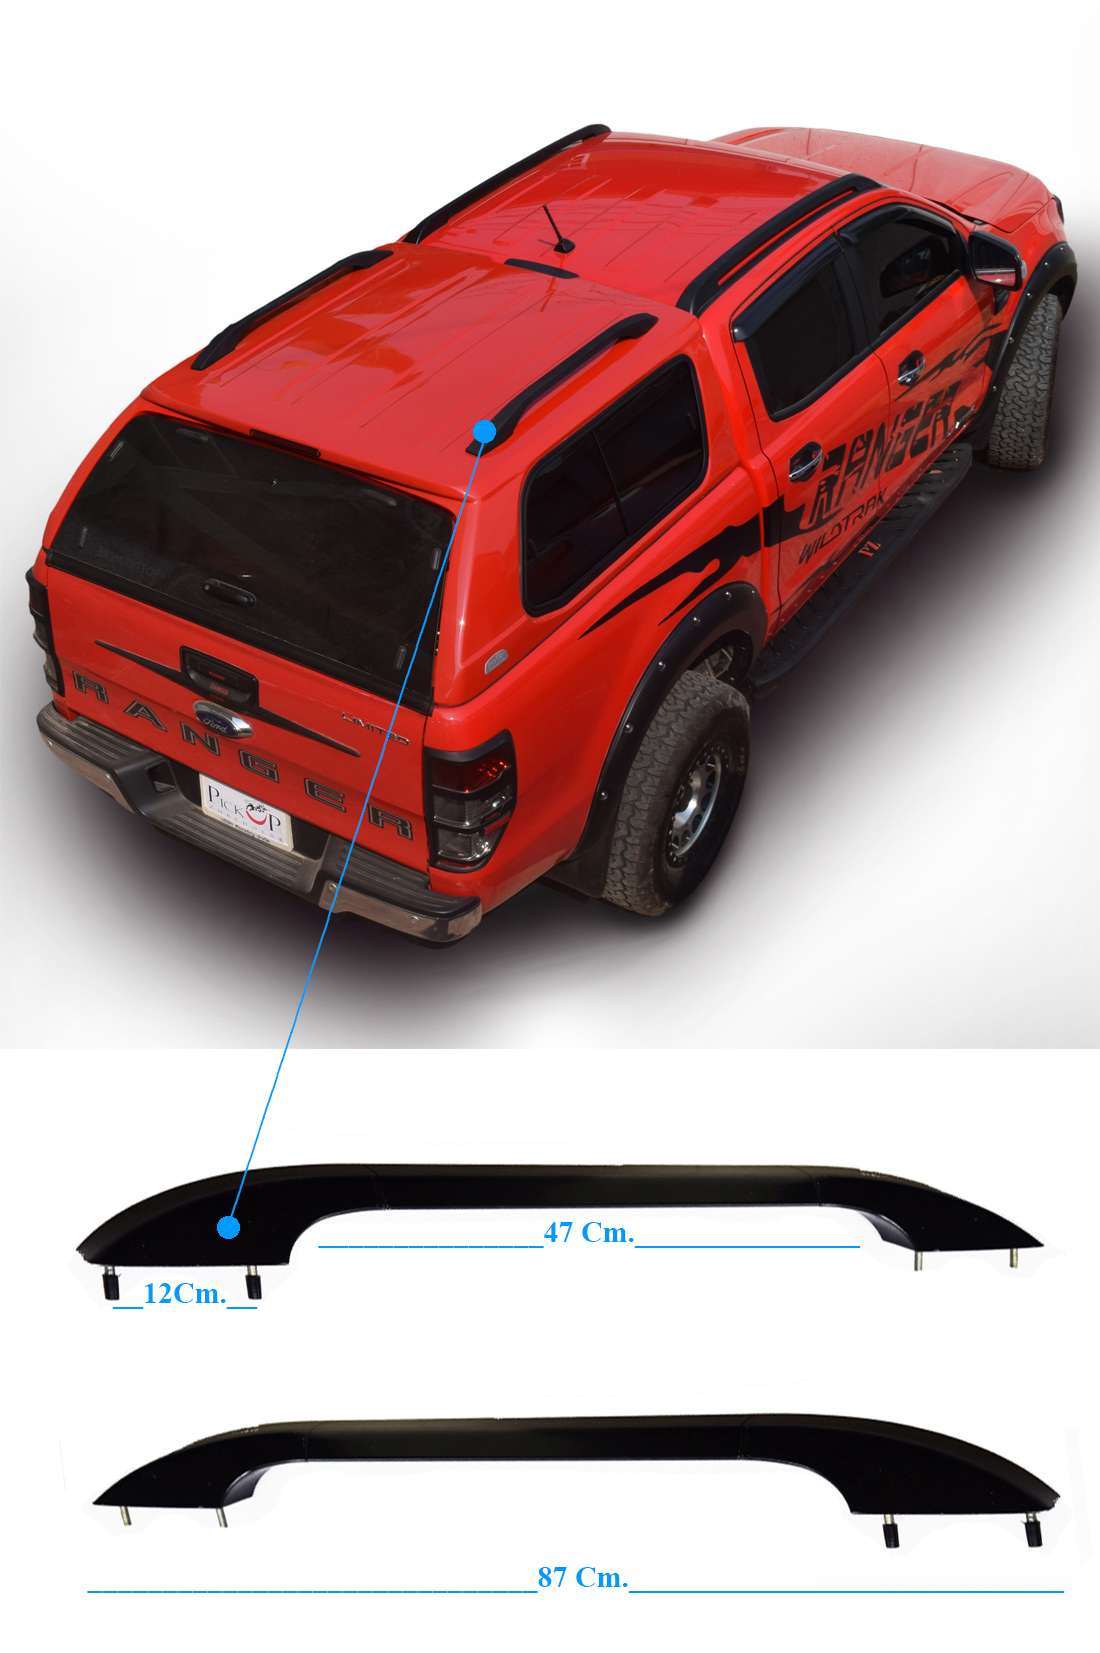 Aluminum roof rails for hardtops and tonneau covers